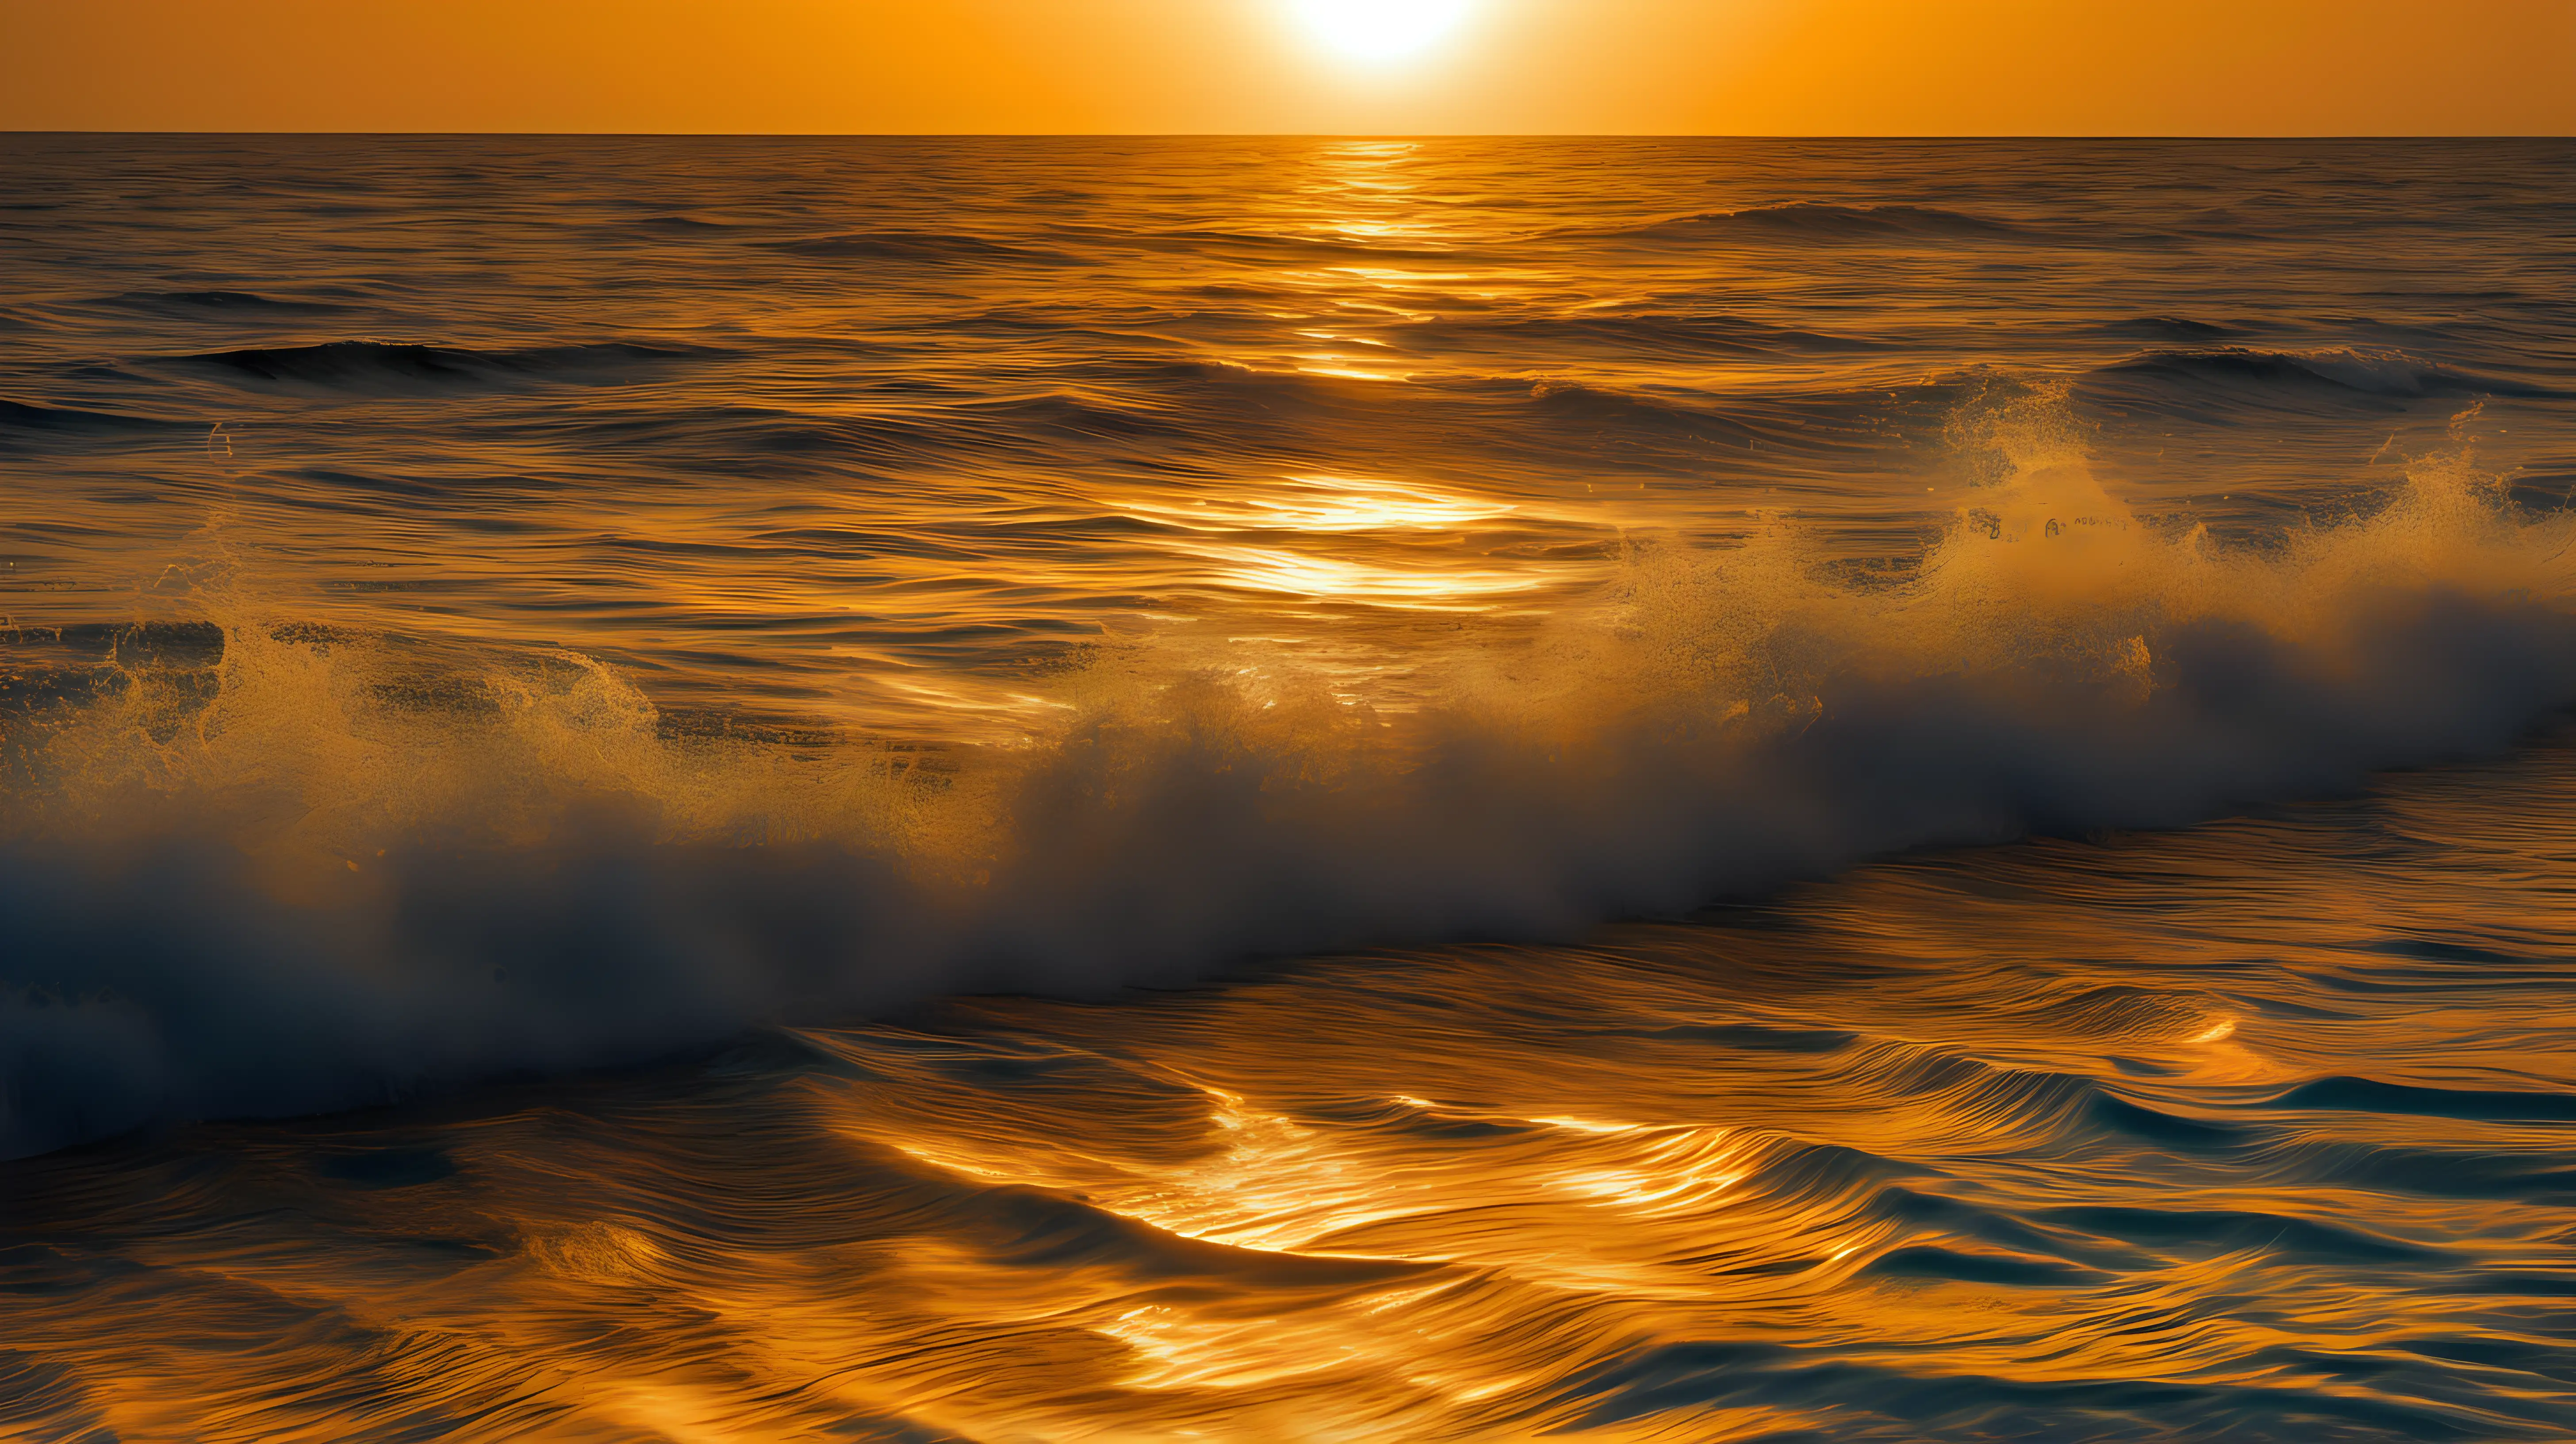 A mosaic of golden reflections dancing on the rippling waves of an endless ocean, kissed by the setting sun